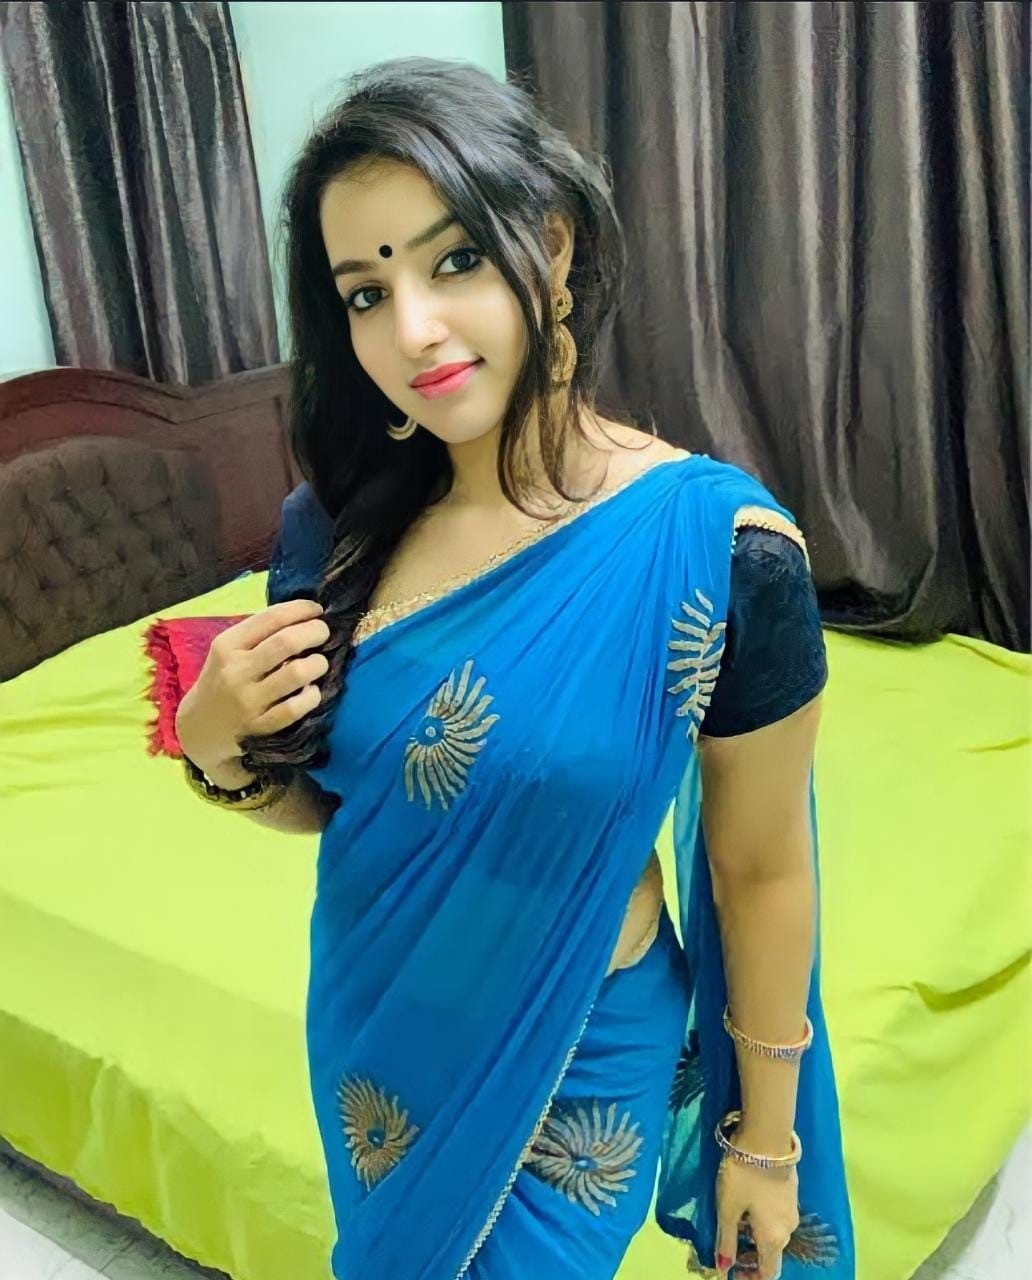 Call Girls Available In Sect-40 Gurgaon 9650313428 Escorts Service In Delhi Ncr